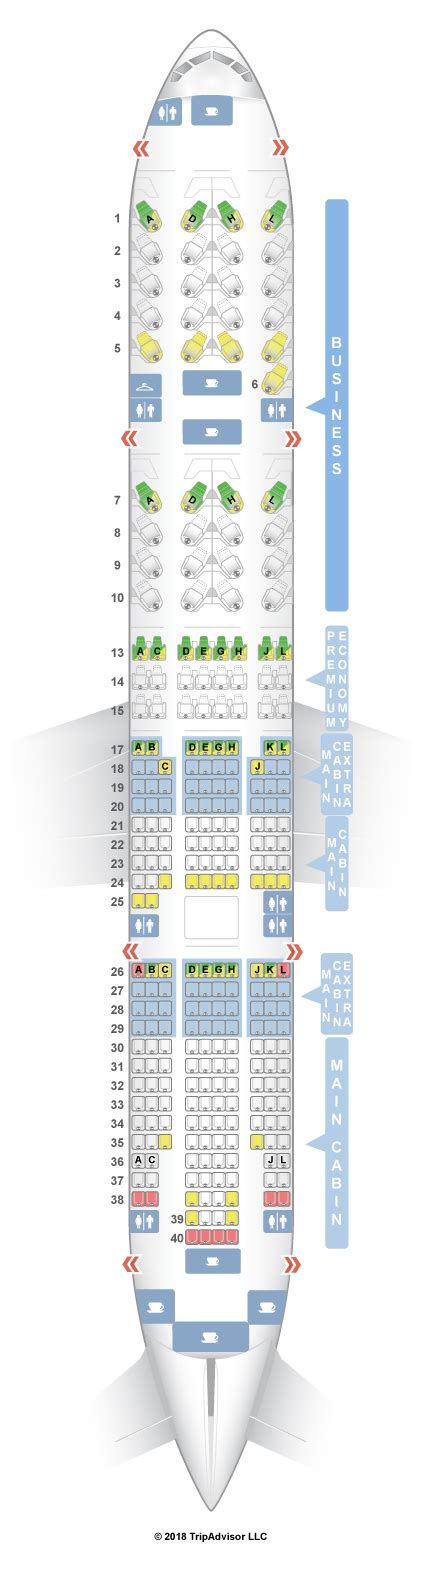 Boeing 777 200 seat guru. For your next Delta flight, use this seating chart to get the most comfortable seats, legroom, and recline on . Delta Boeing 777-200ER/LR (7CB) Layout 1. Note: There are 2 versions of this aircraft. Seat Map; Info; Photos; Click any seat for more information ... 